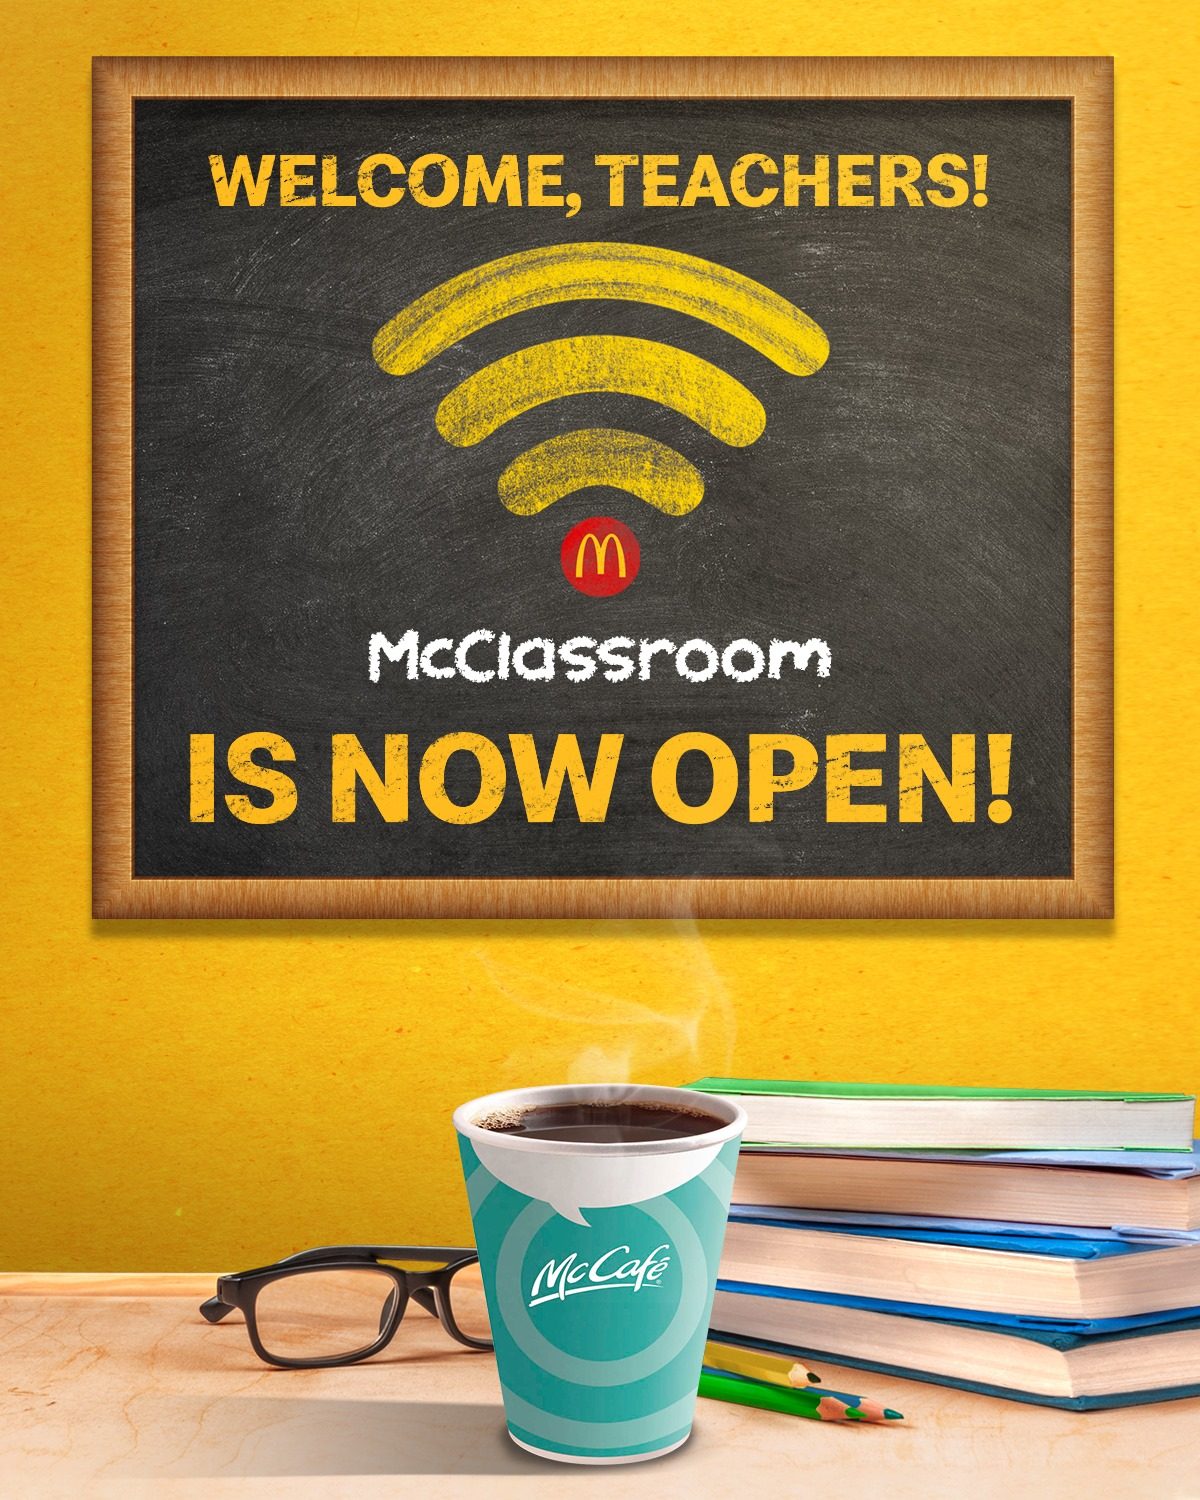 McDonald’s to convert party rooms into McClassrooms for teachers